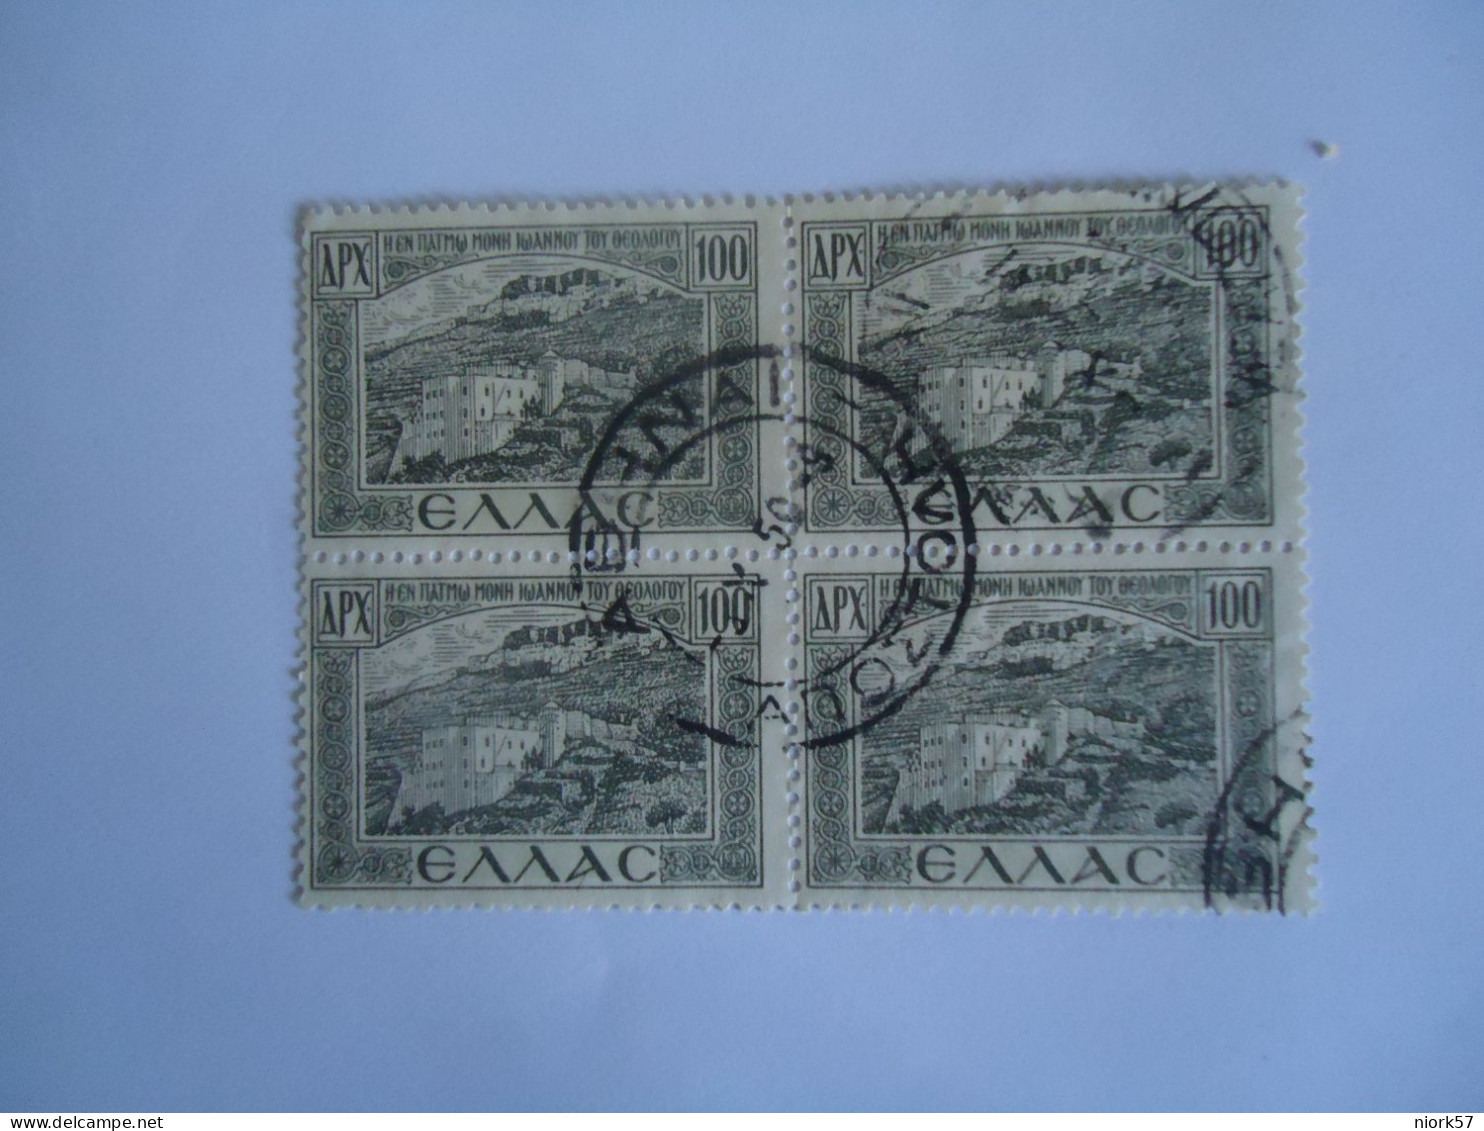 GREECE USED STAMPS 1937 ΤΟΠΙΑ   BLOCK OF 4 POSTMARK  ΑΘΗΝΑΙ - Used Stamps